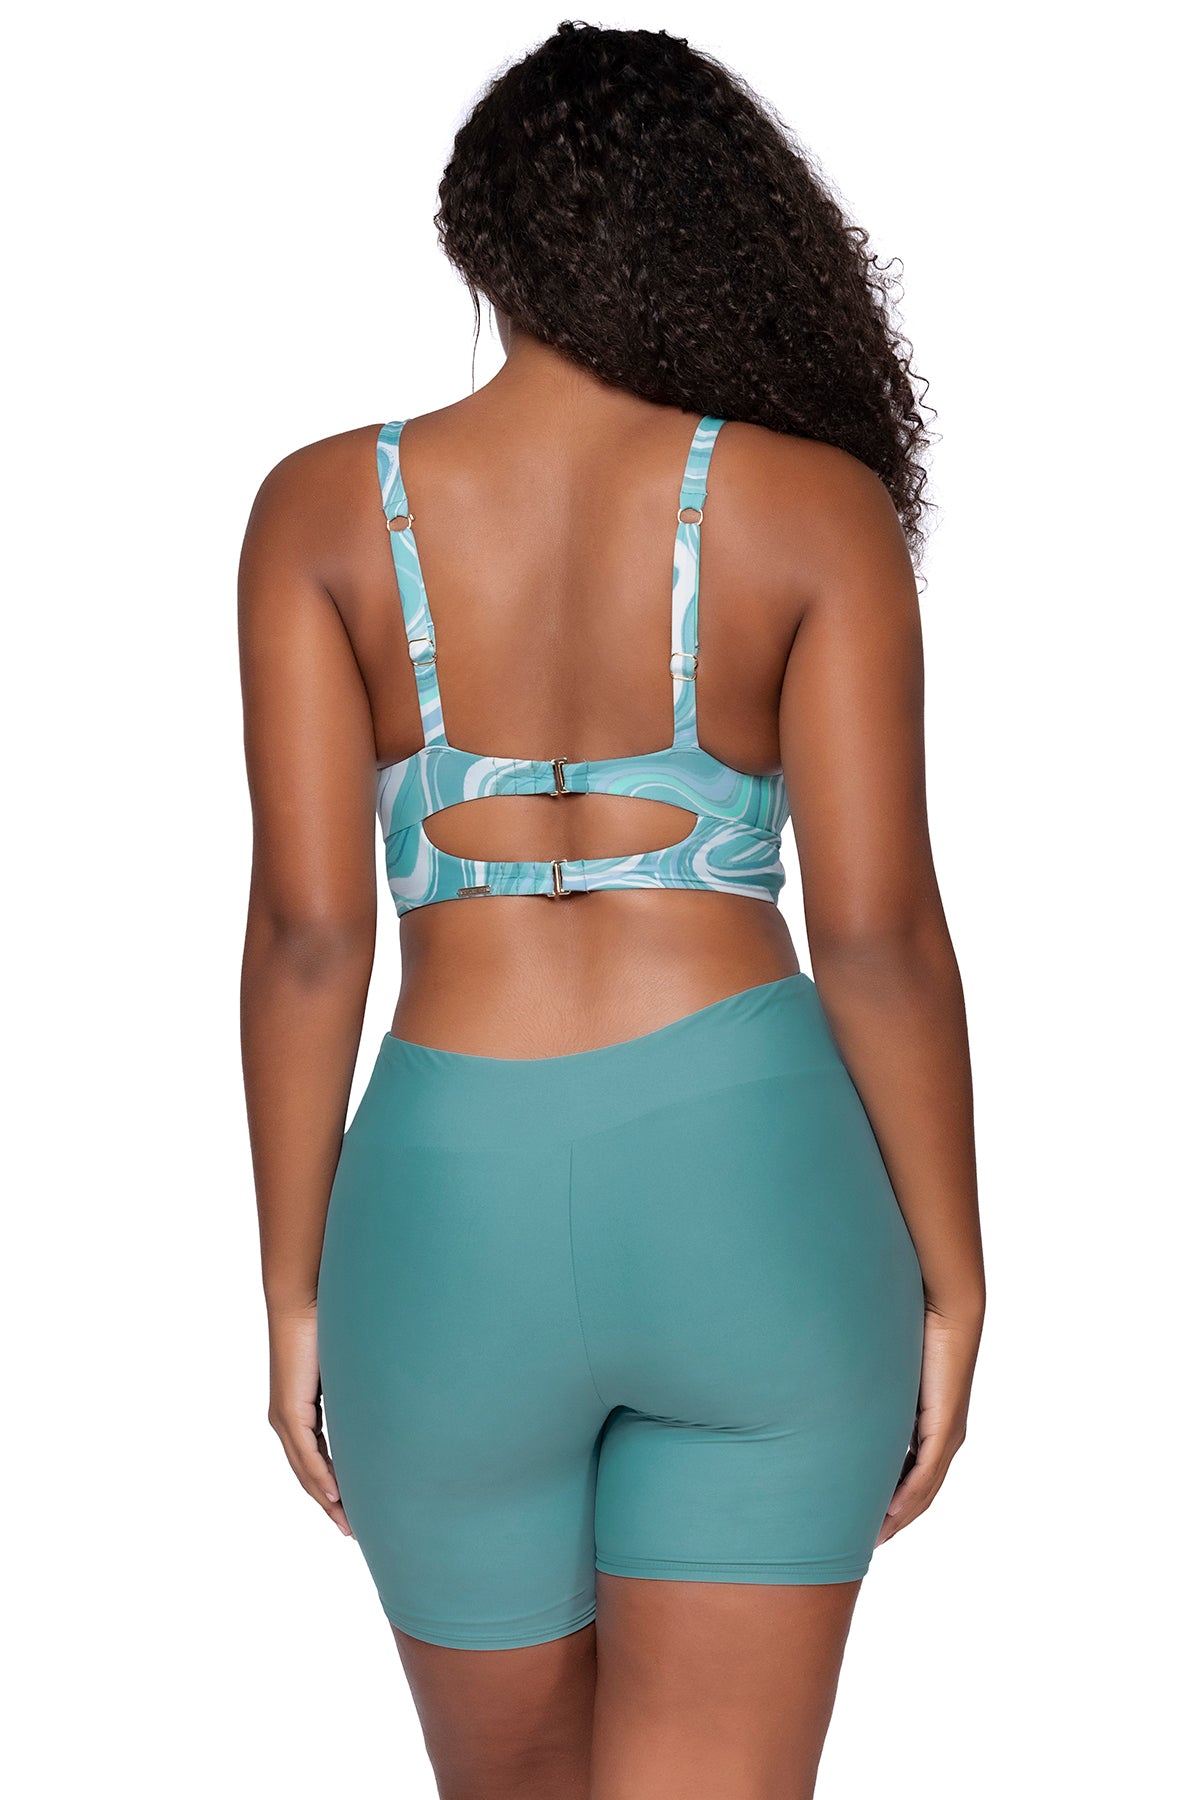 Back view of Sunsets Moon Tide Colette Bralette Top with matching Bayside Bike Short swim bottom